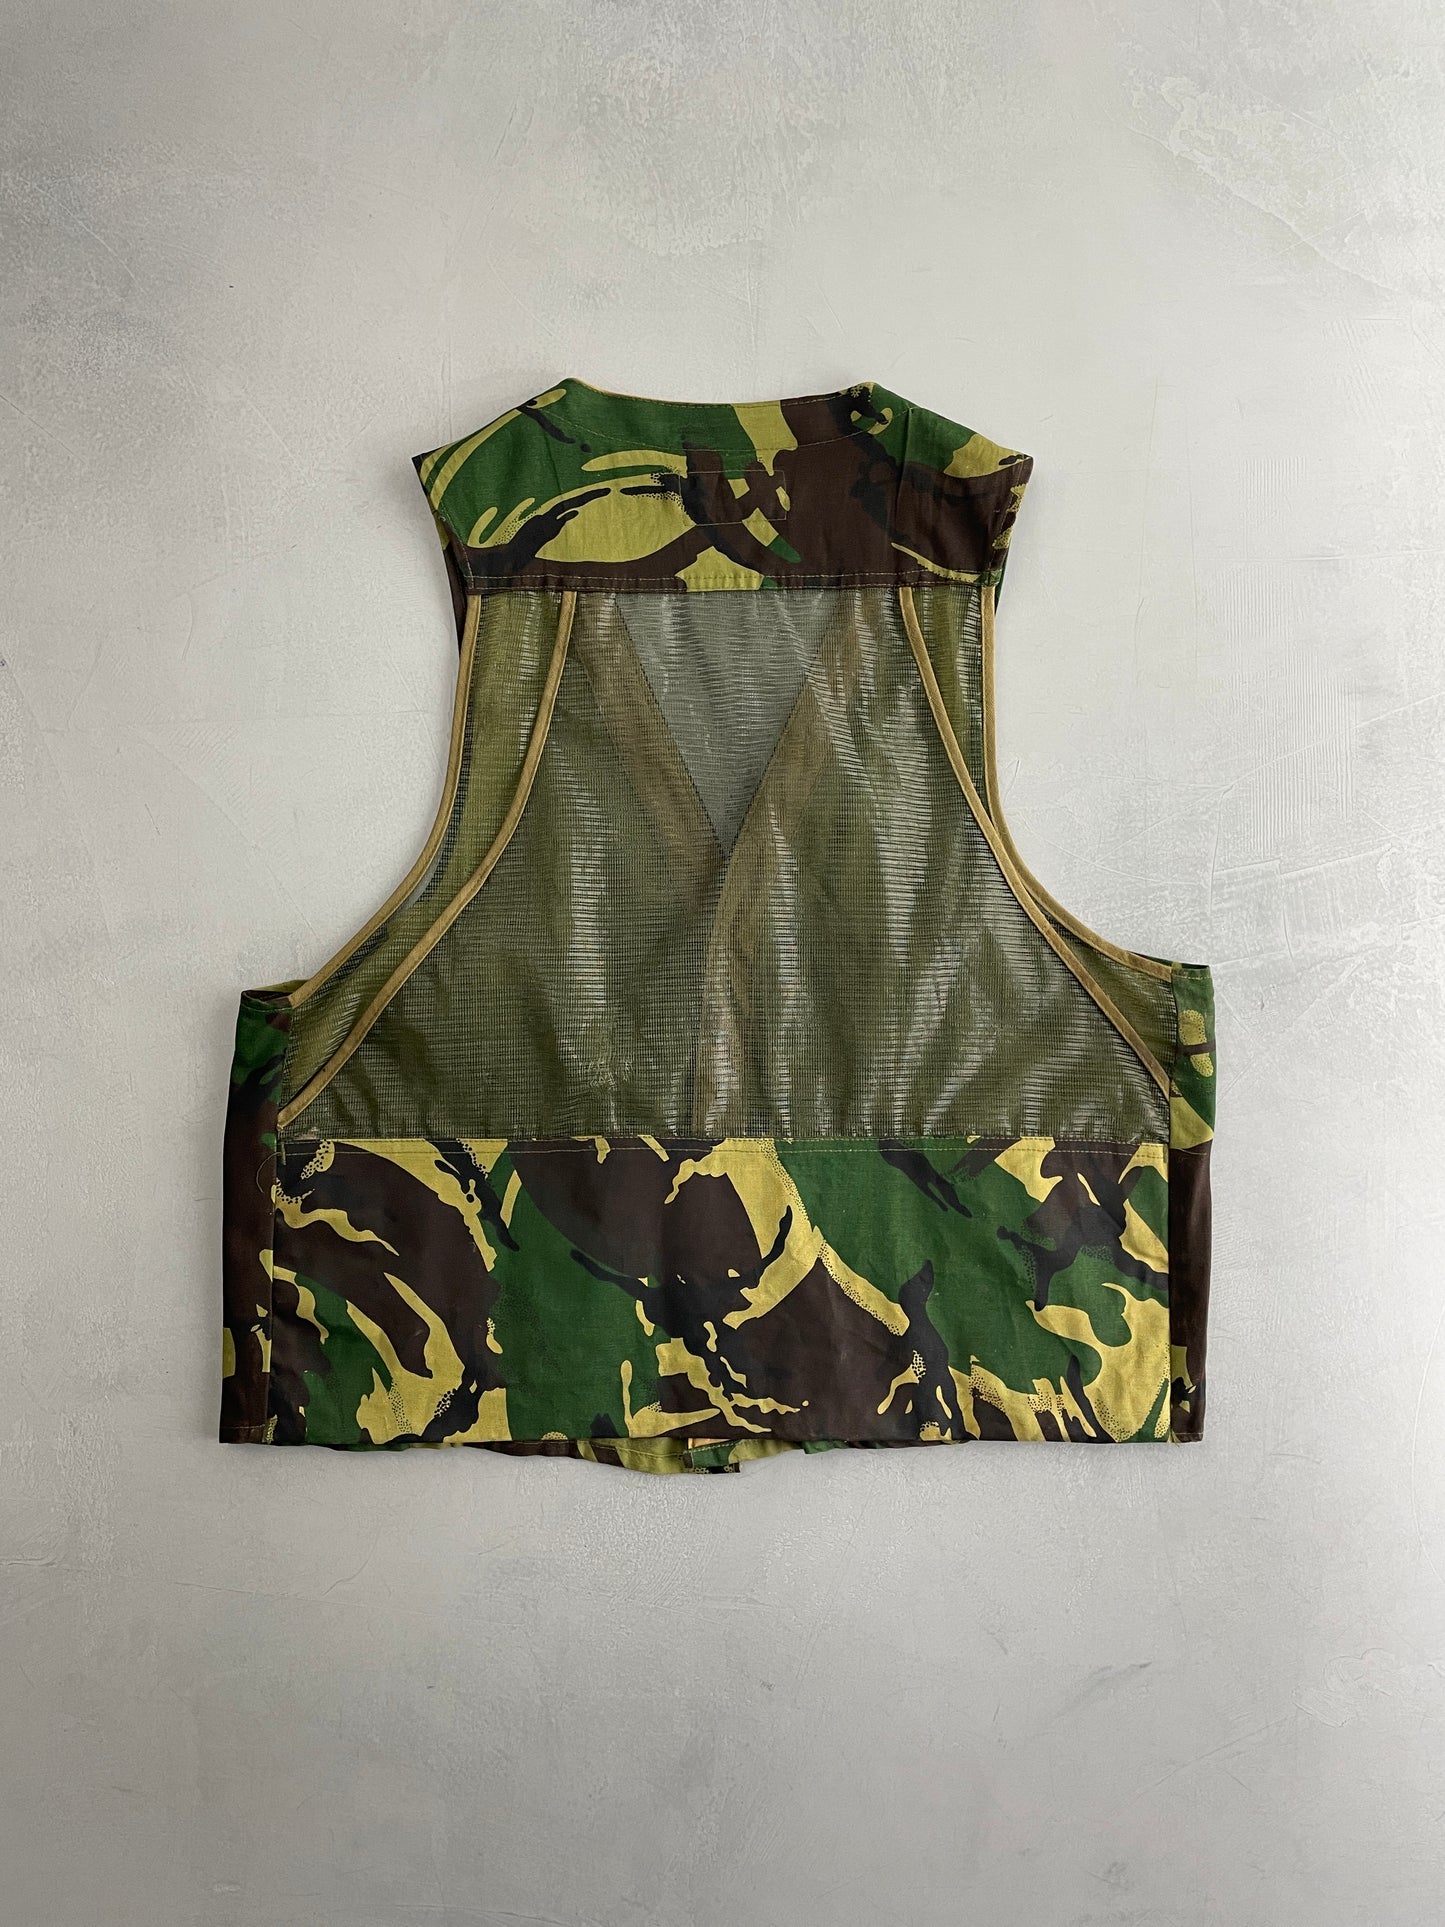 Red Head Camo Hunting Vest [M]